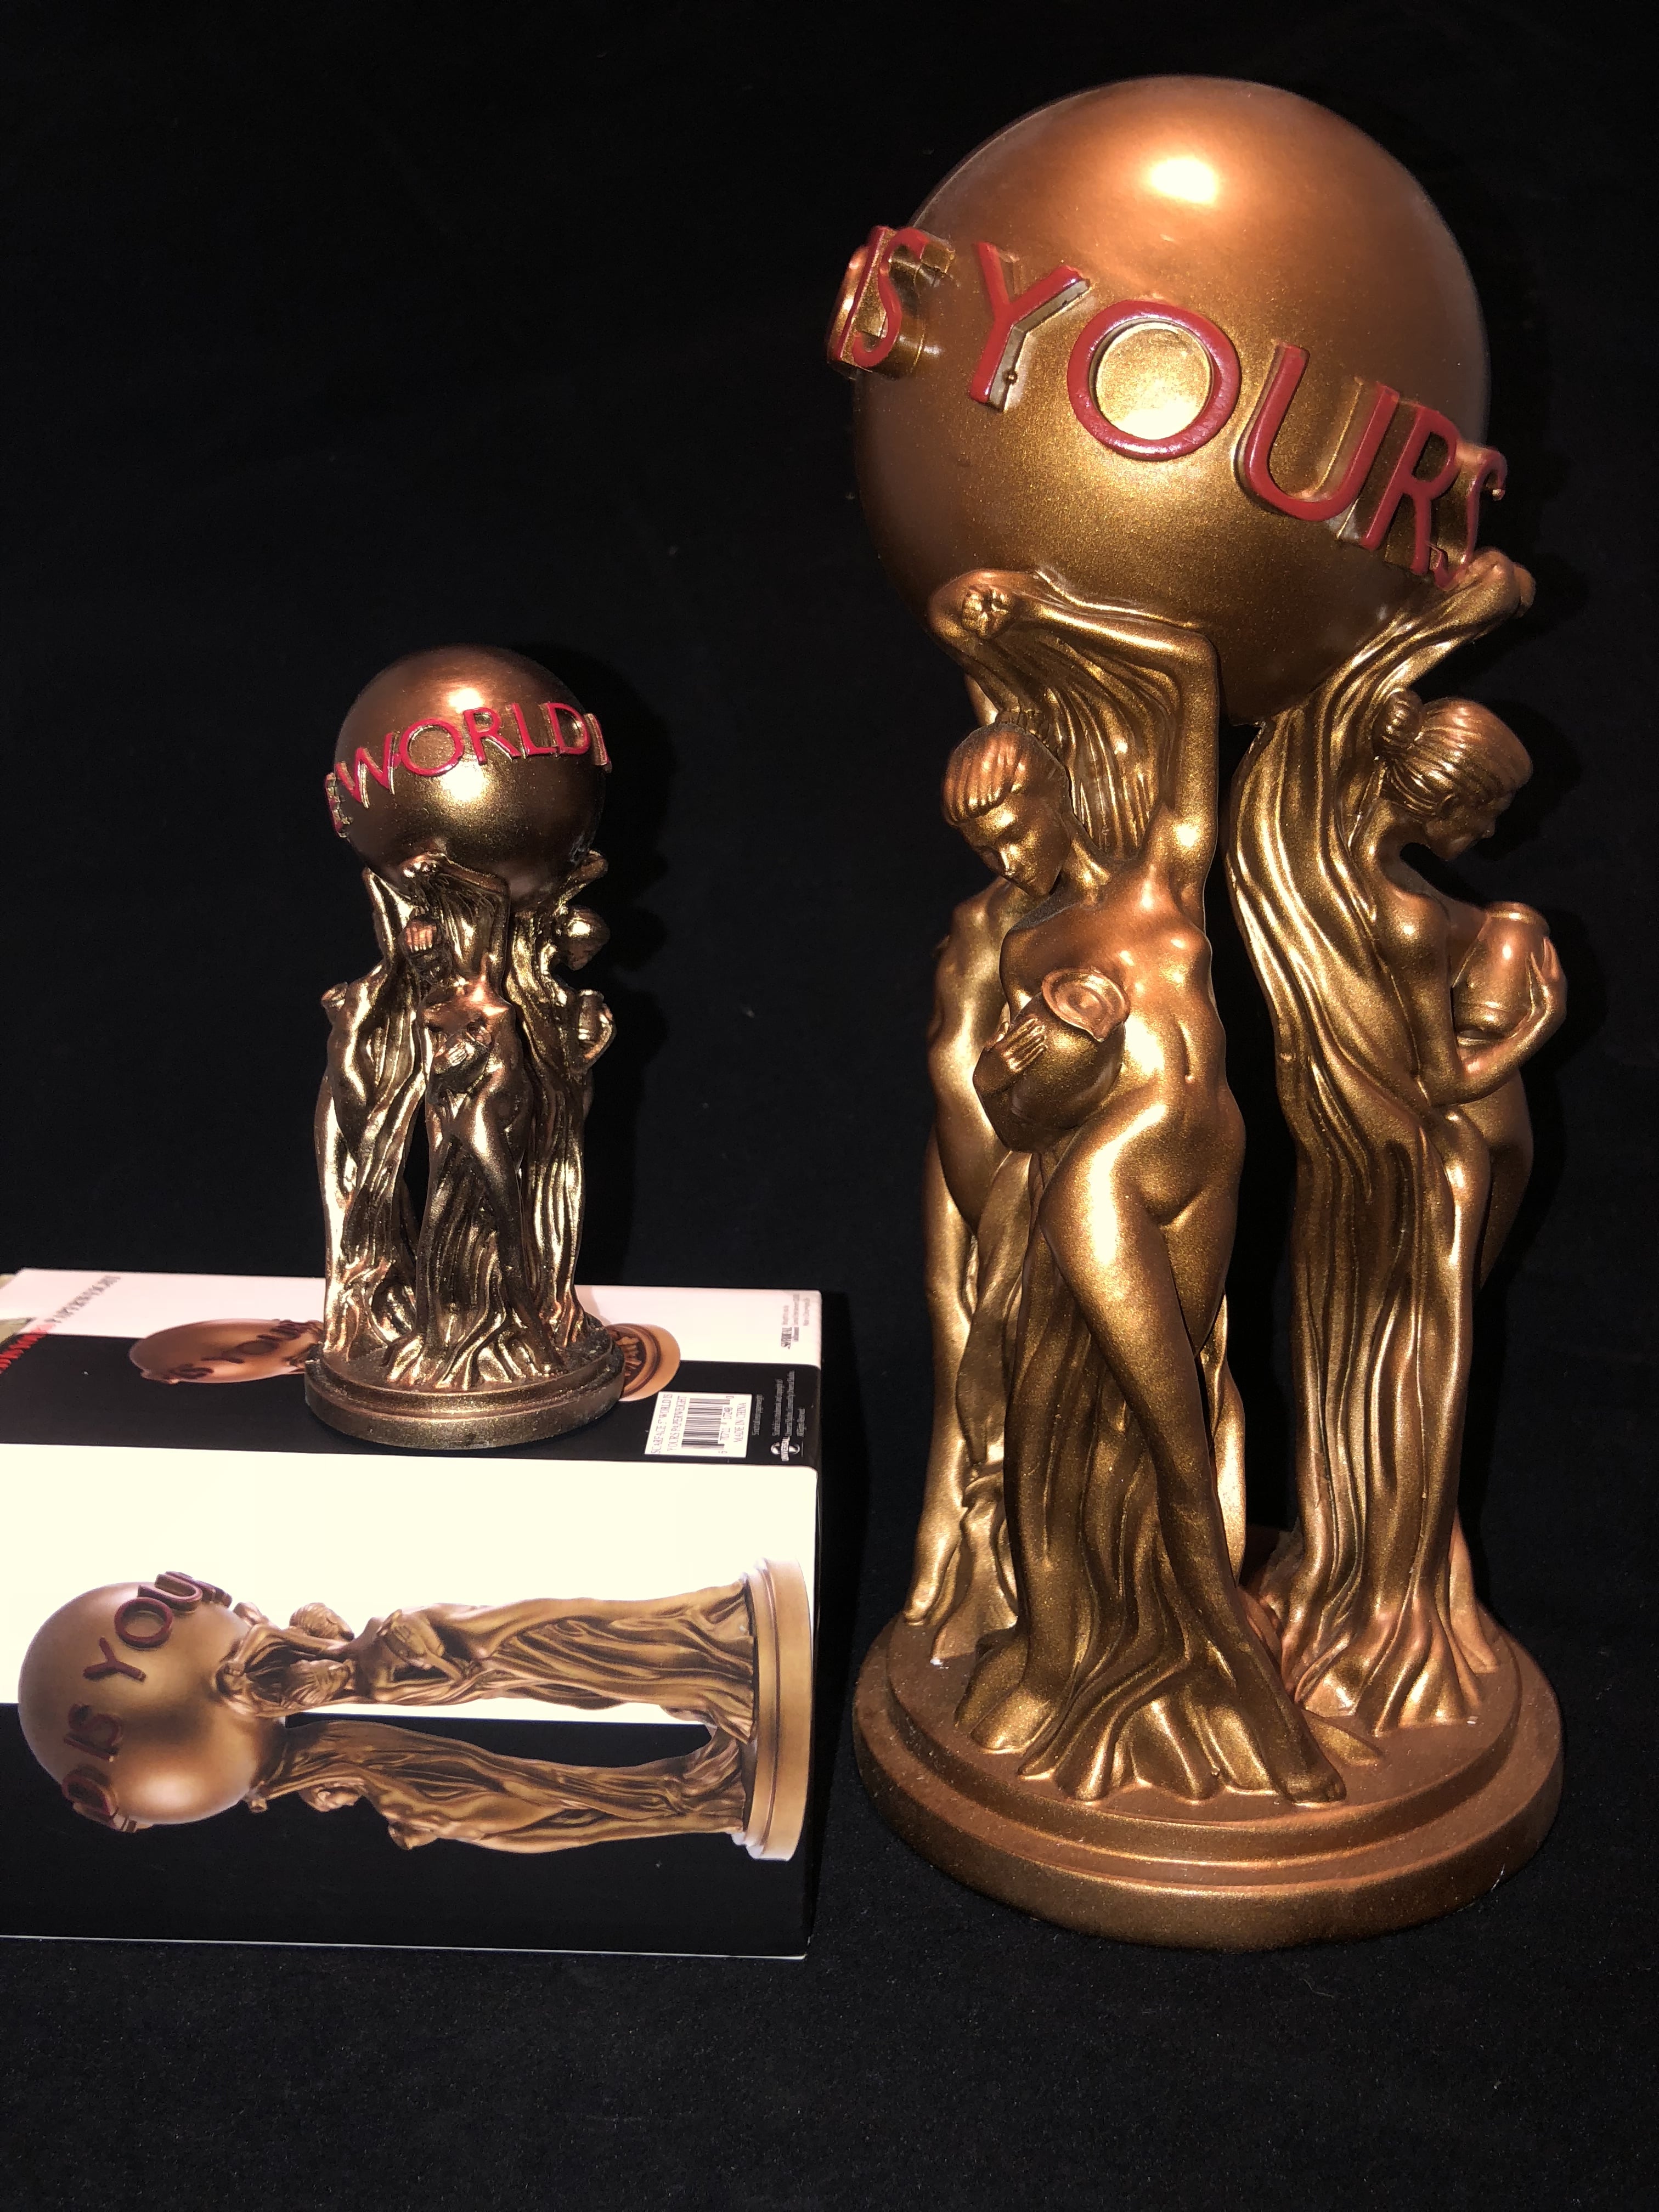 Toynk's Scarface "The World is Yours" statue paperweights review